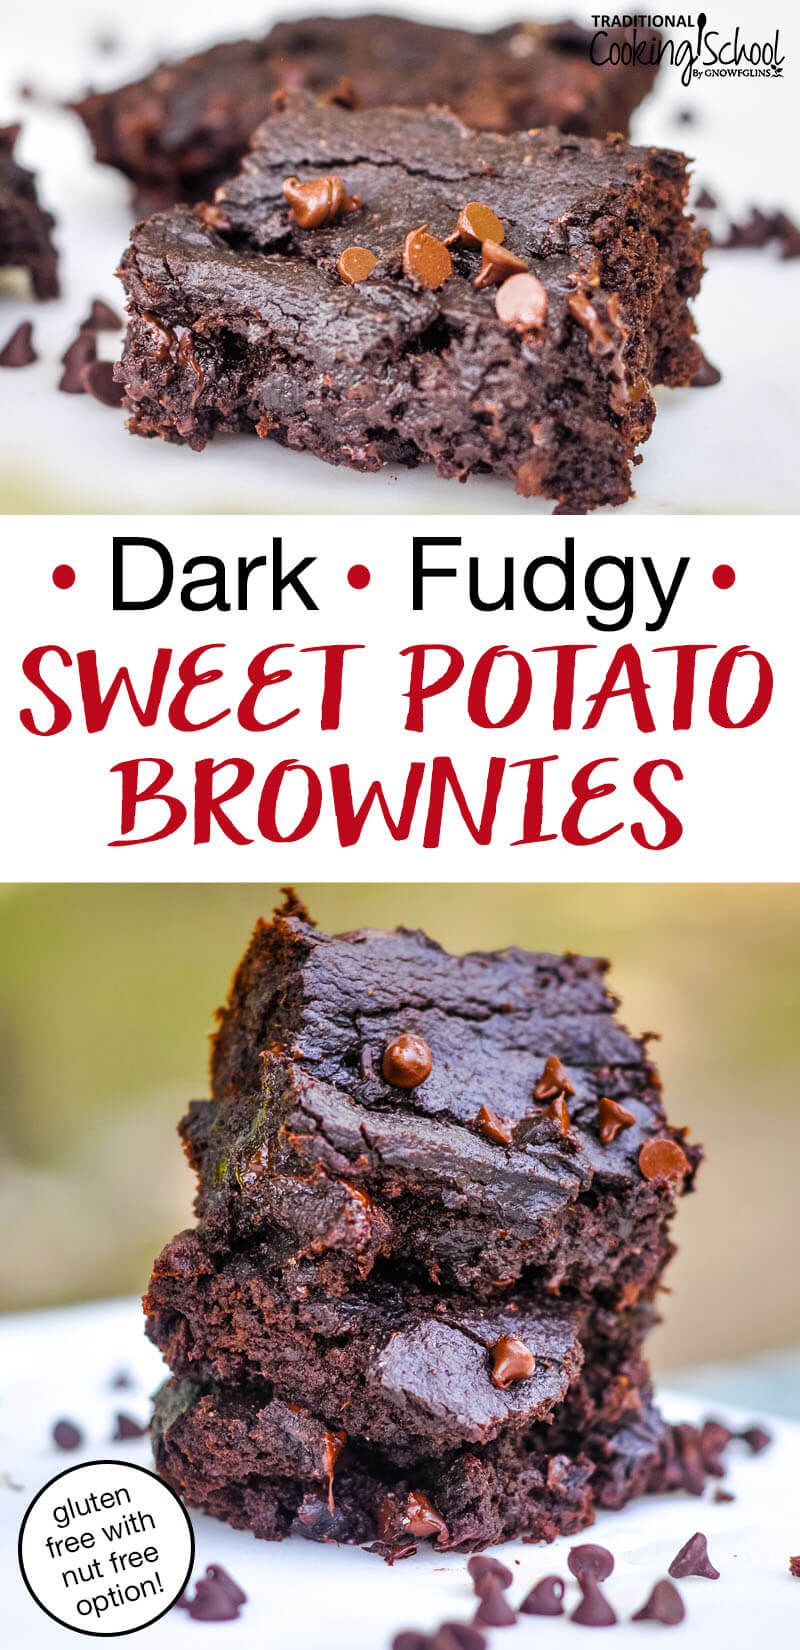 photo collage of gooey, decadent brownies sprinkled with melty mini chocolate chips with text overlay: "Dark & Fudgy Sweet Potato Brownies (gluten-free with nut-free option!)"